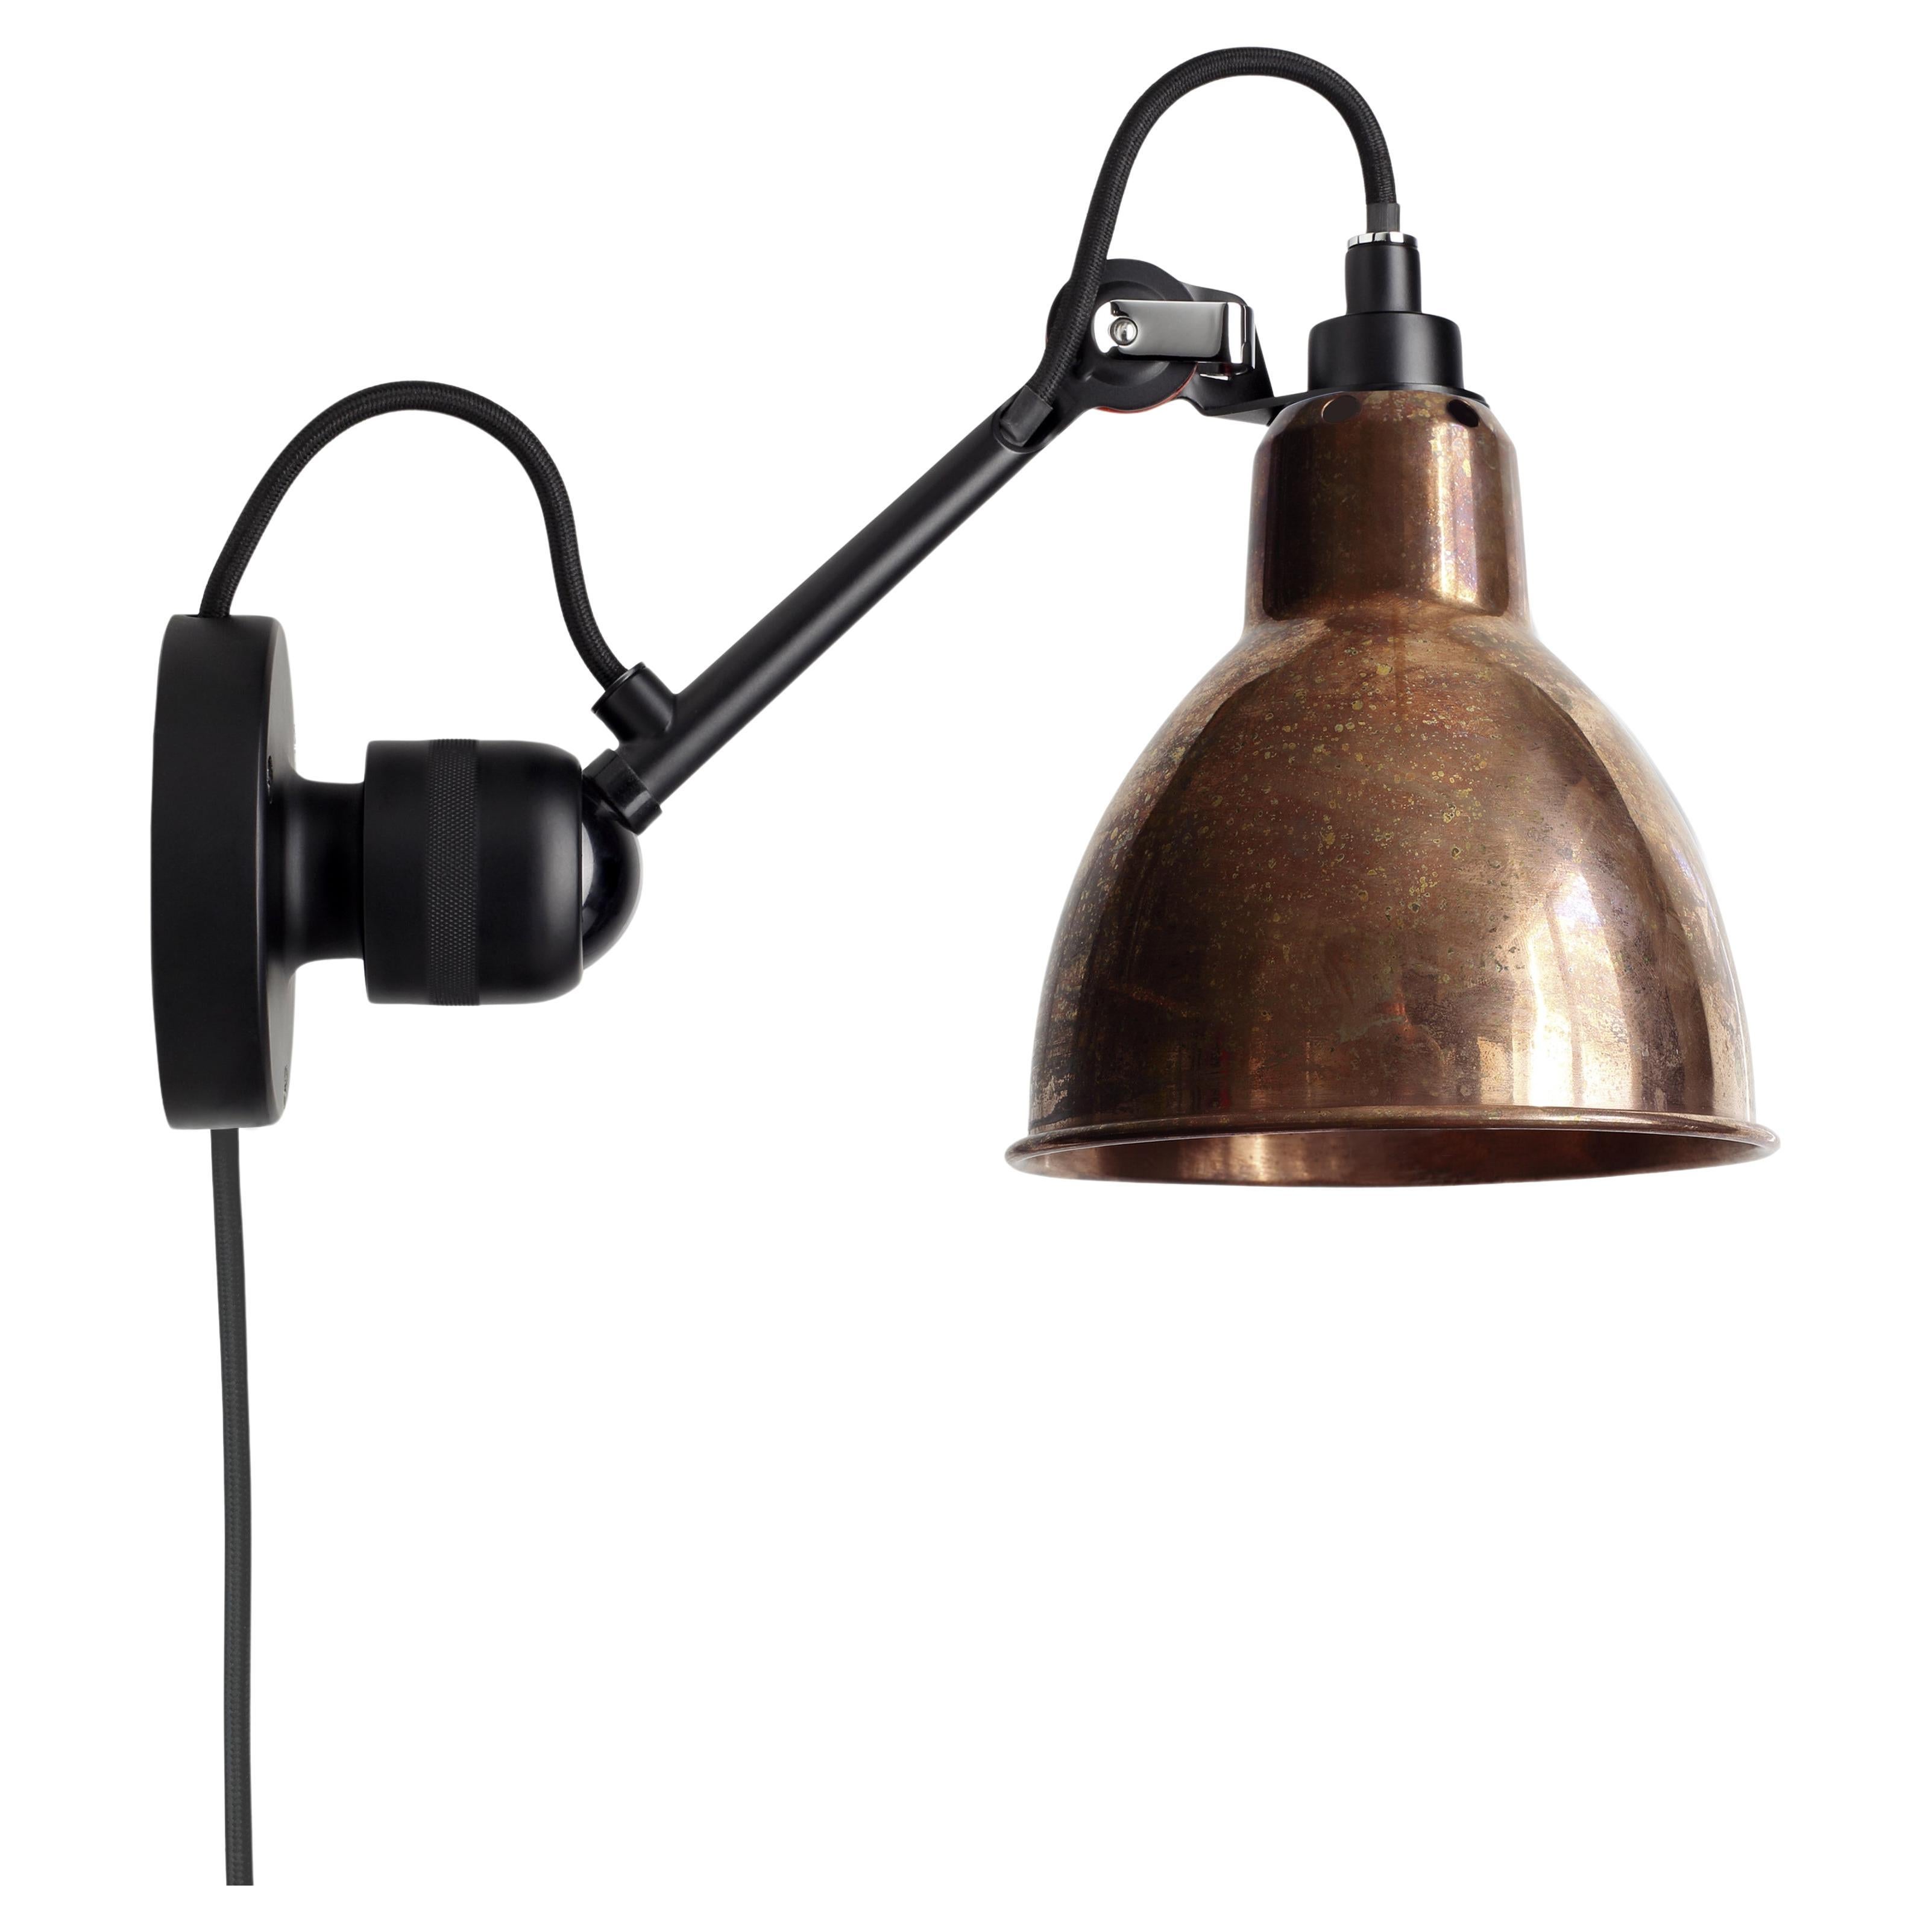 DCW Editions La Lampe Gras N°304 CA Wall Lamp in Black Arm and Raw Copper Shade For Sale